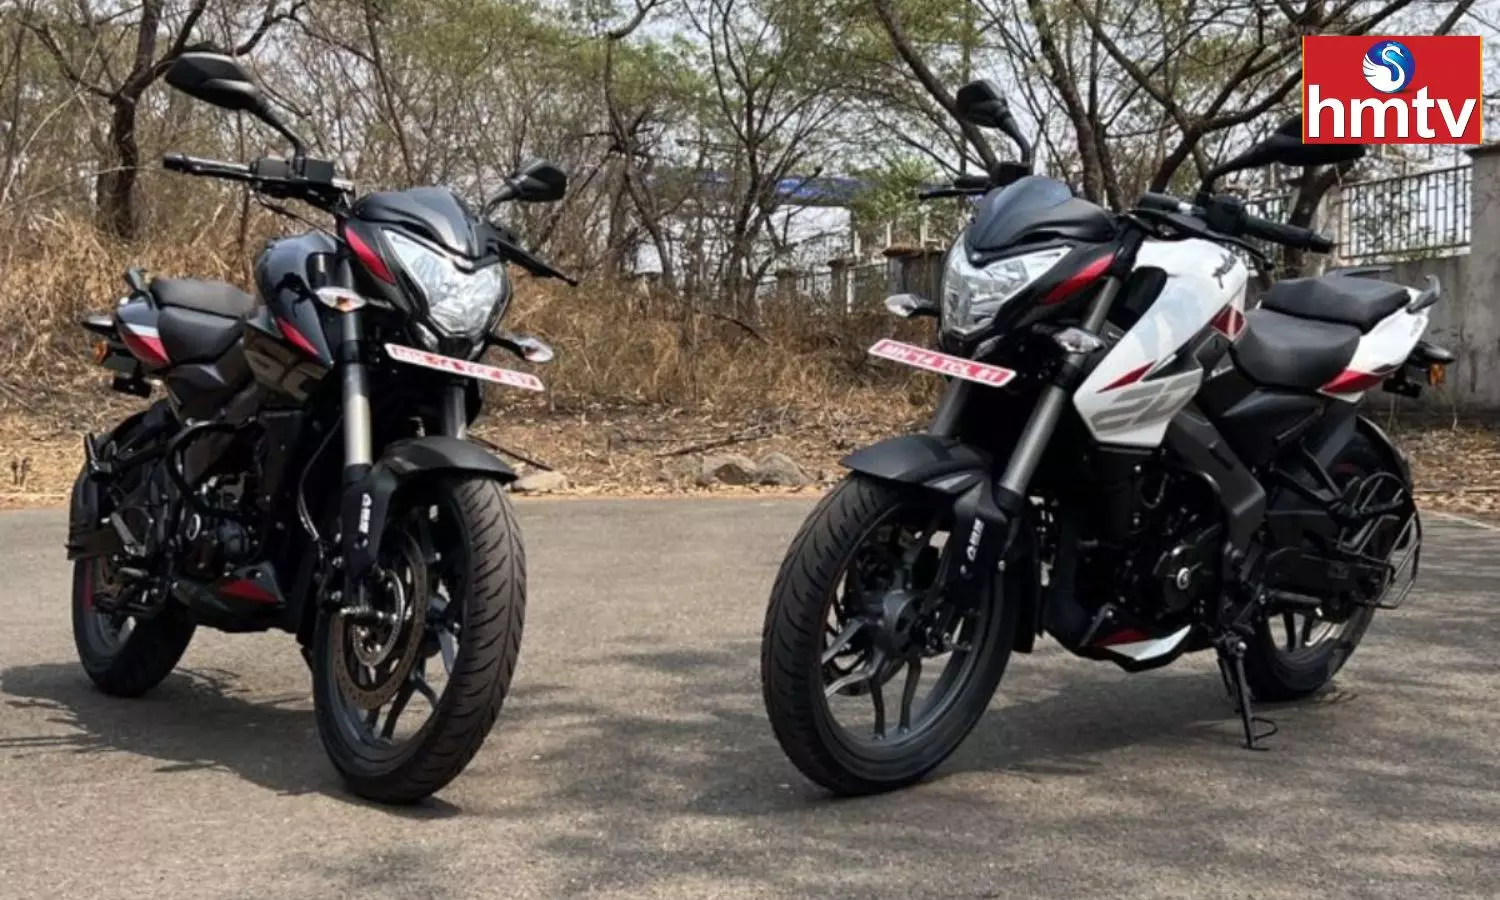 Bajaj Auto Launched The updated Pulsar NS160 And NS200 In Indian Market Check Price And Features